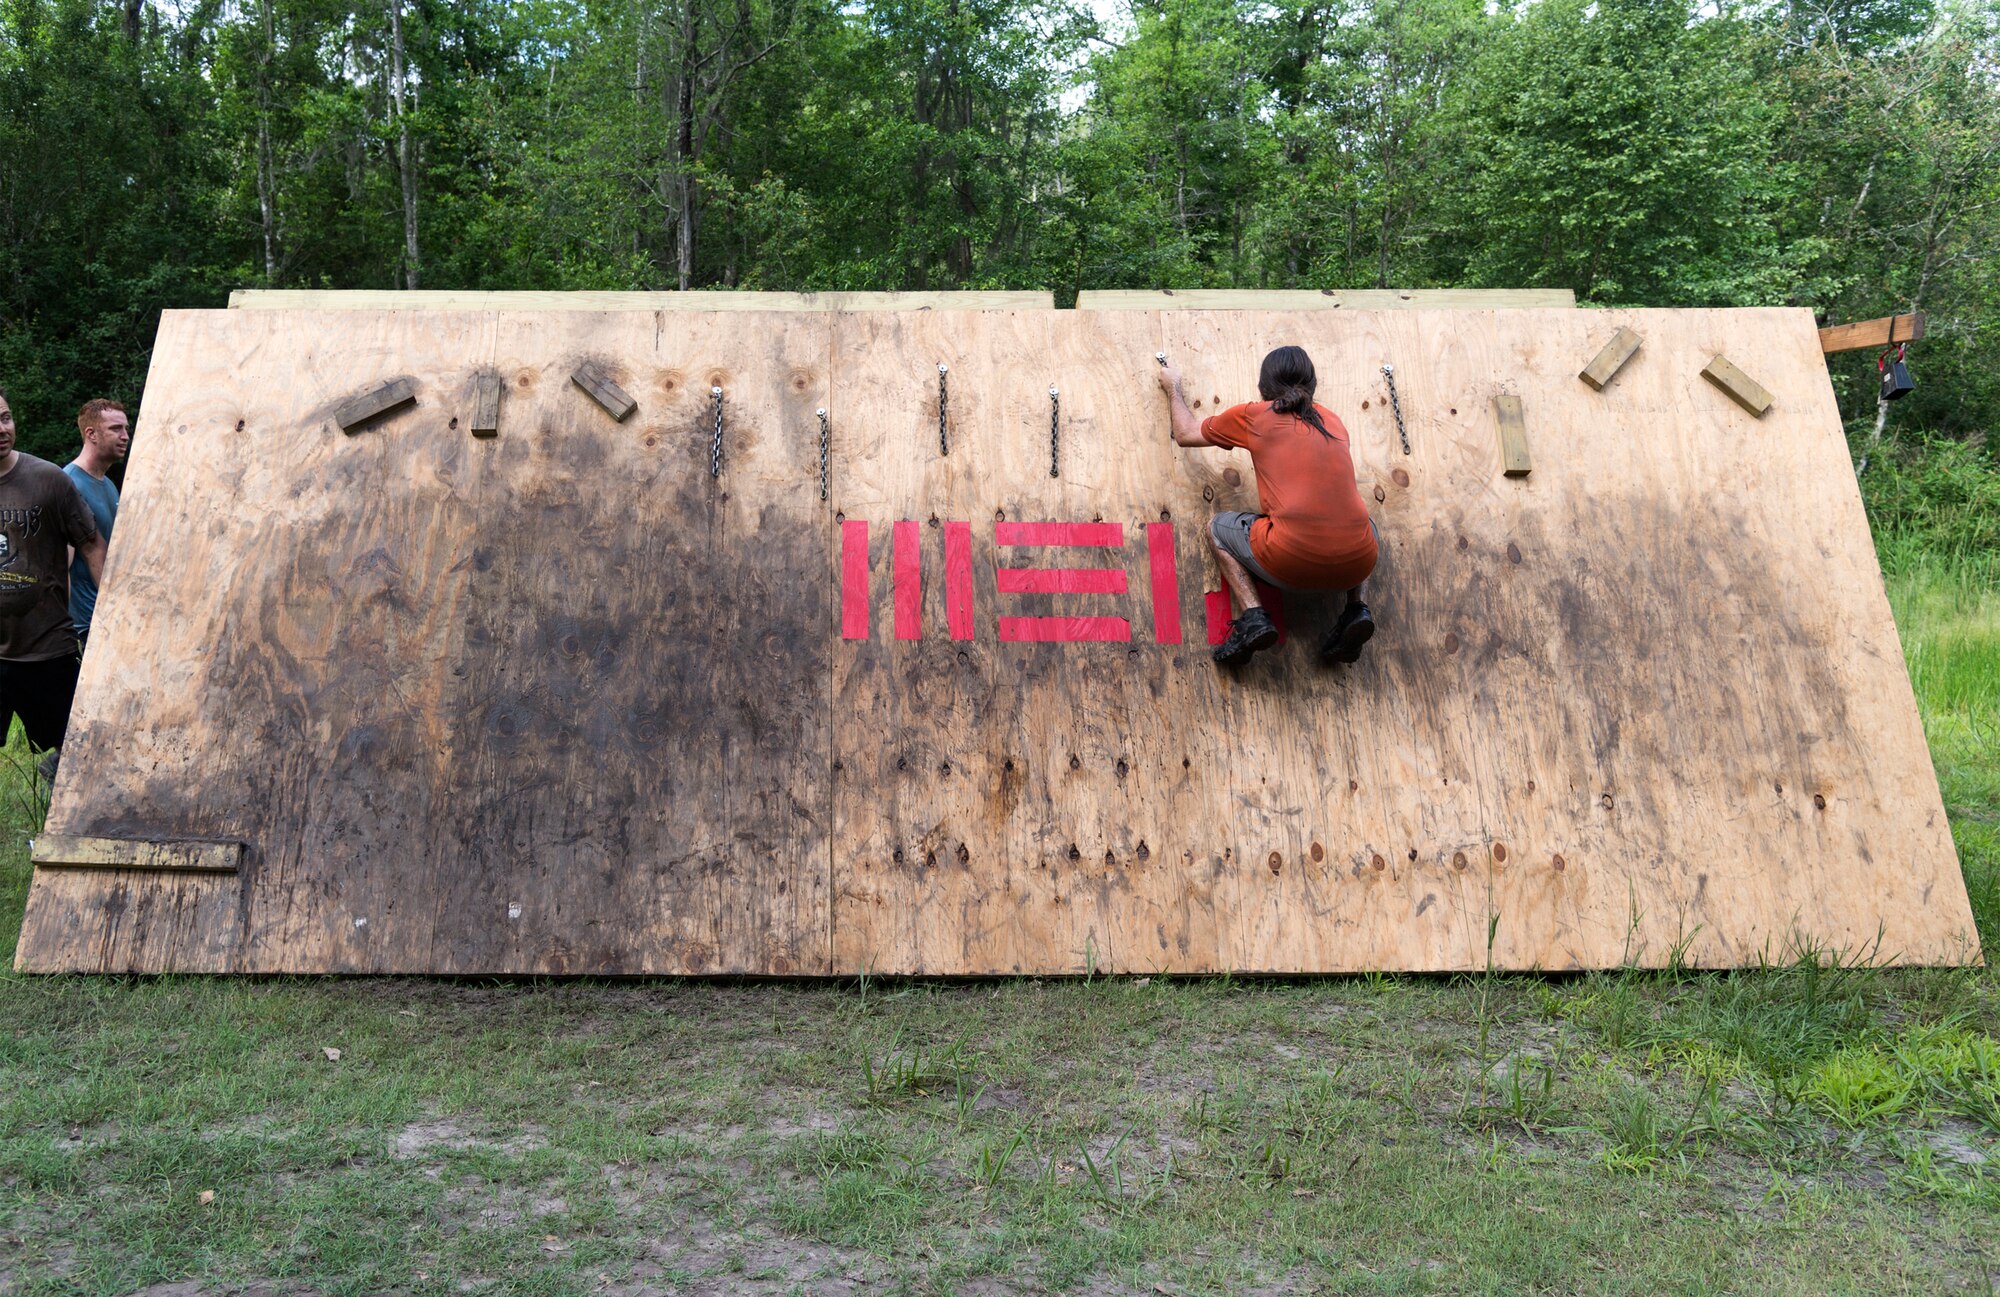 A participant crosses an obstacle during the Moody Mud Run, May 4, 2019, at Possum Creek Off-Road Park in Ray City, Ga. The sixth annual Moody Mud Run had approximately 850 participants who had to overcome a series of obstacles on the 4 and 5-mile courses. The 32-obstacle course gave Airmen, families and the local community an opportunity to build camaraderie and teamwork skills. (U.S. Air Force Photo by Airman 1st Class Taryn Butler)